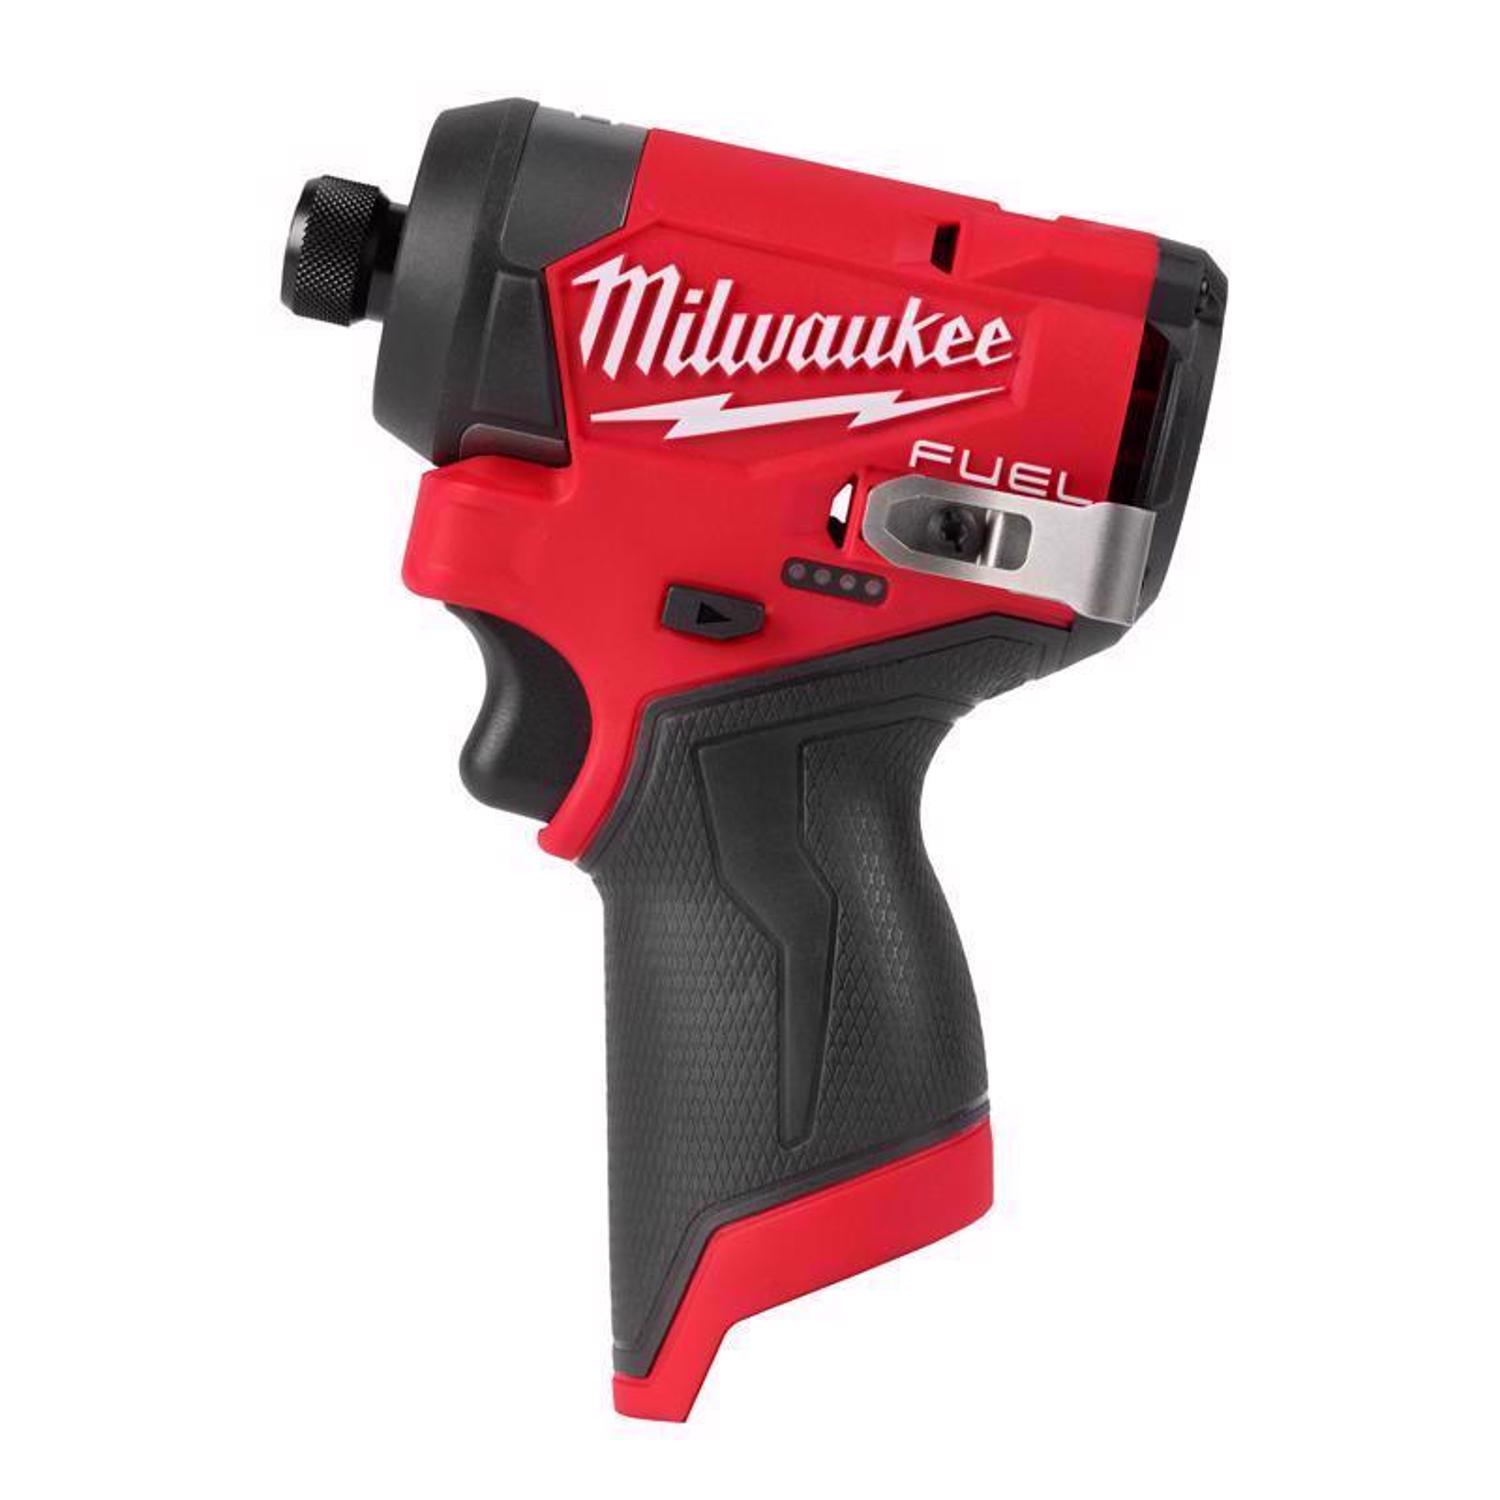 Photos - Drill / Screwdriver Milwaukee M12 FUEL 1/4 in. Cordless Brushless Impact Driver Tool Only 3453 